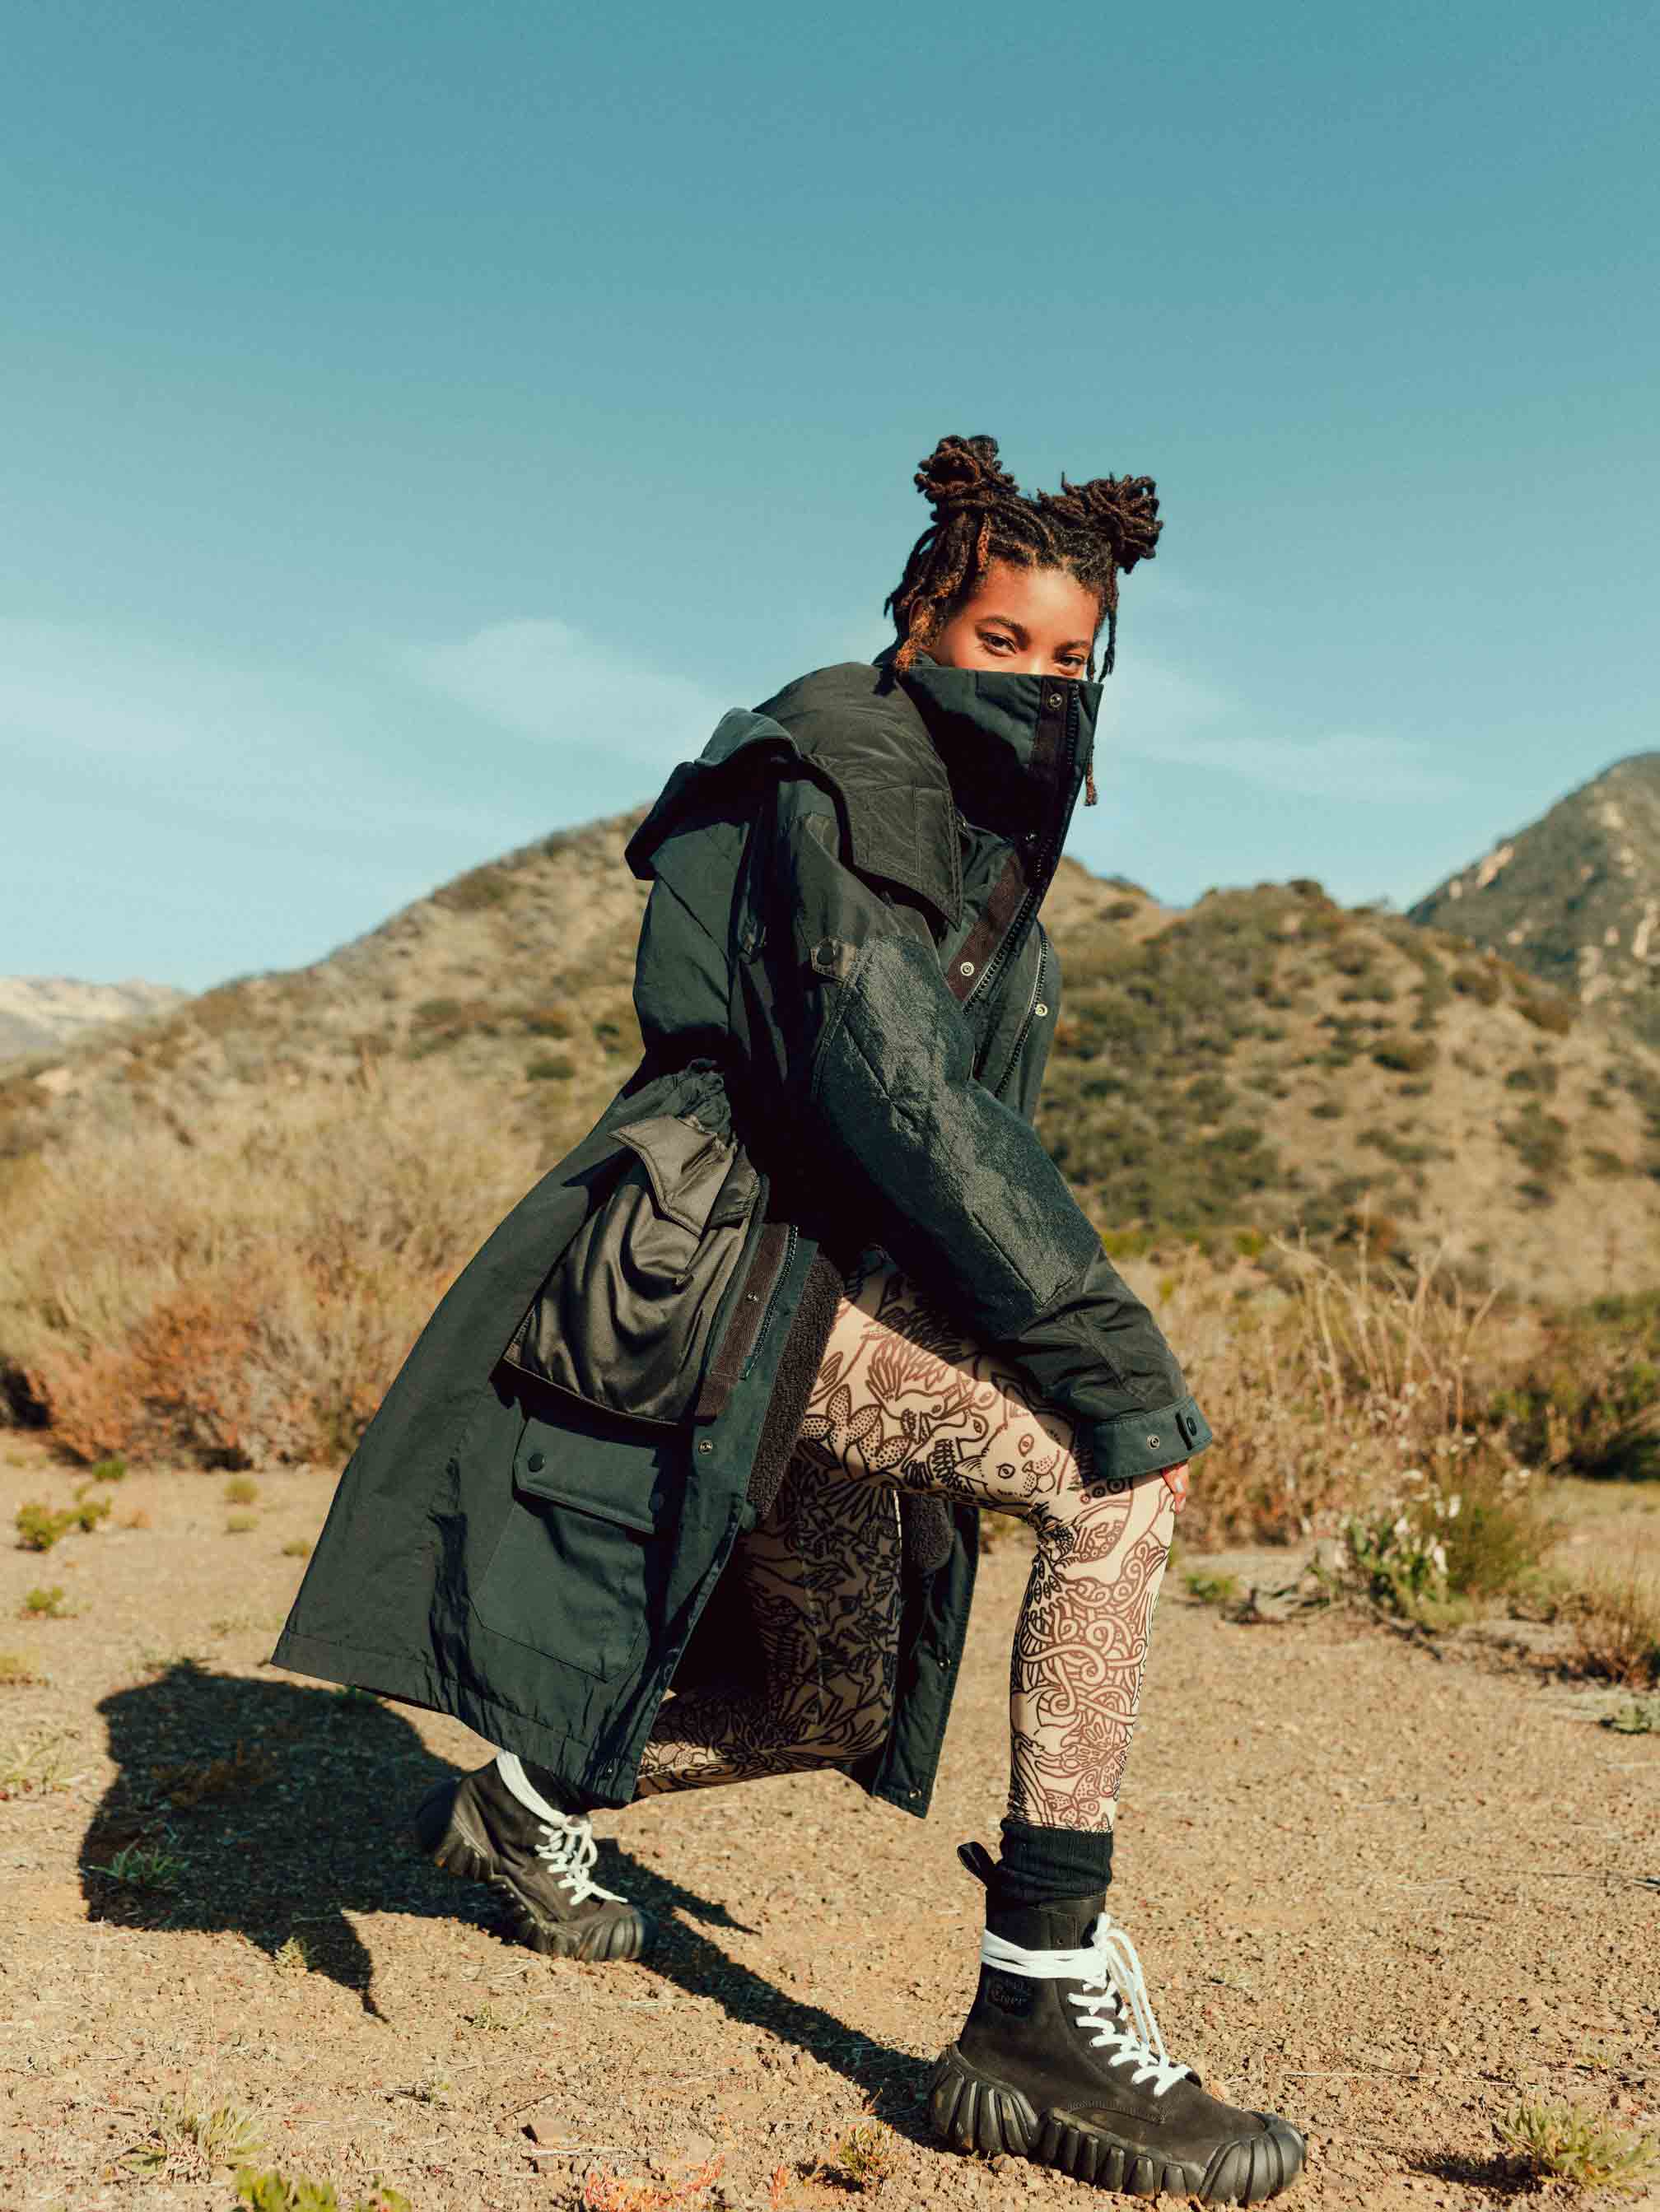 Willow Smith makes her debut as Onitsuka Tiger's new brand ambassador in FW20 campaign. (The campaign was shot before Covid-19).